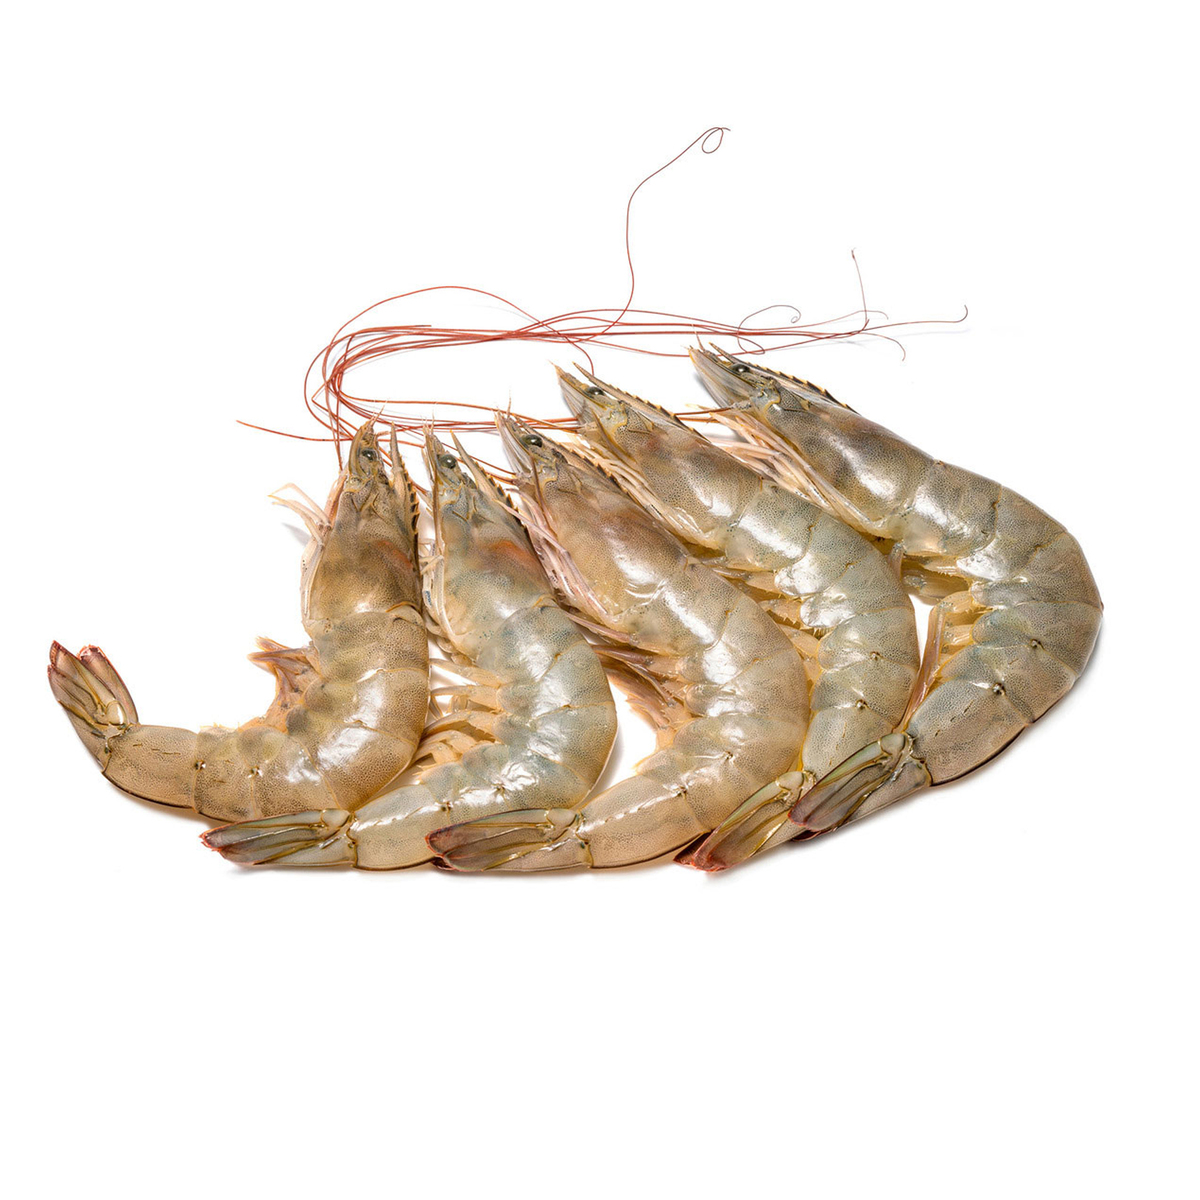 Prawns Large 500g Approx Weight